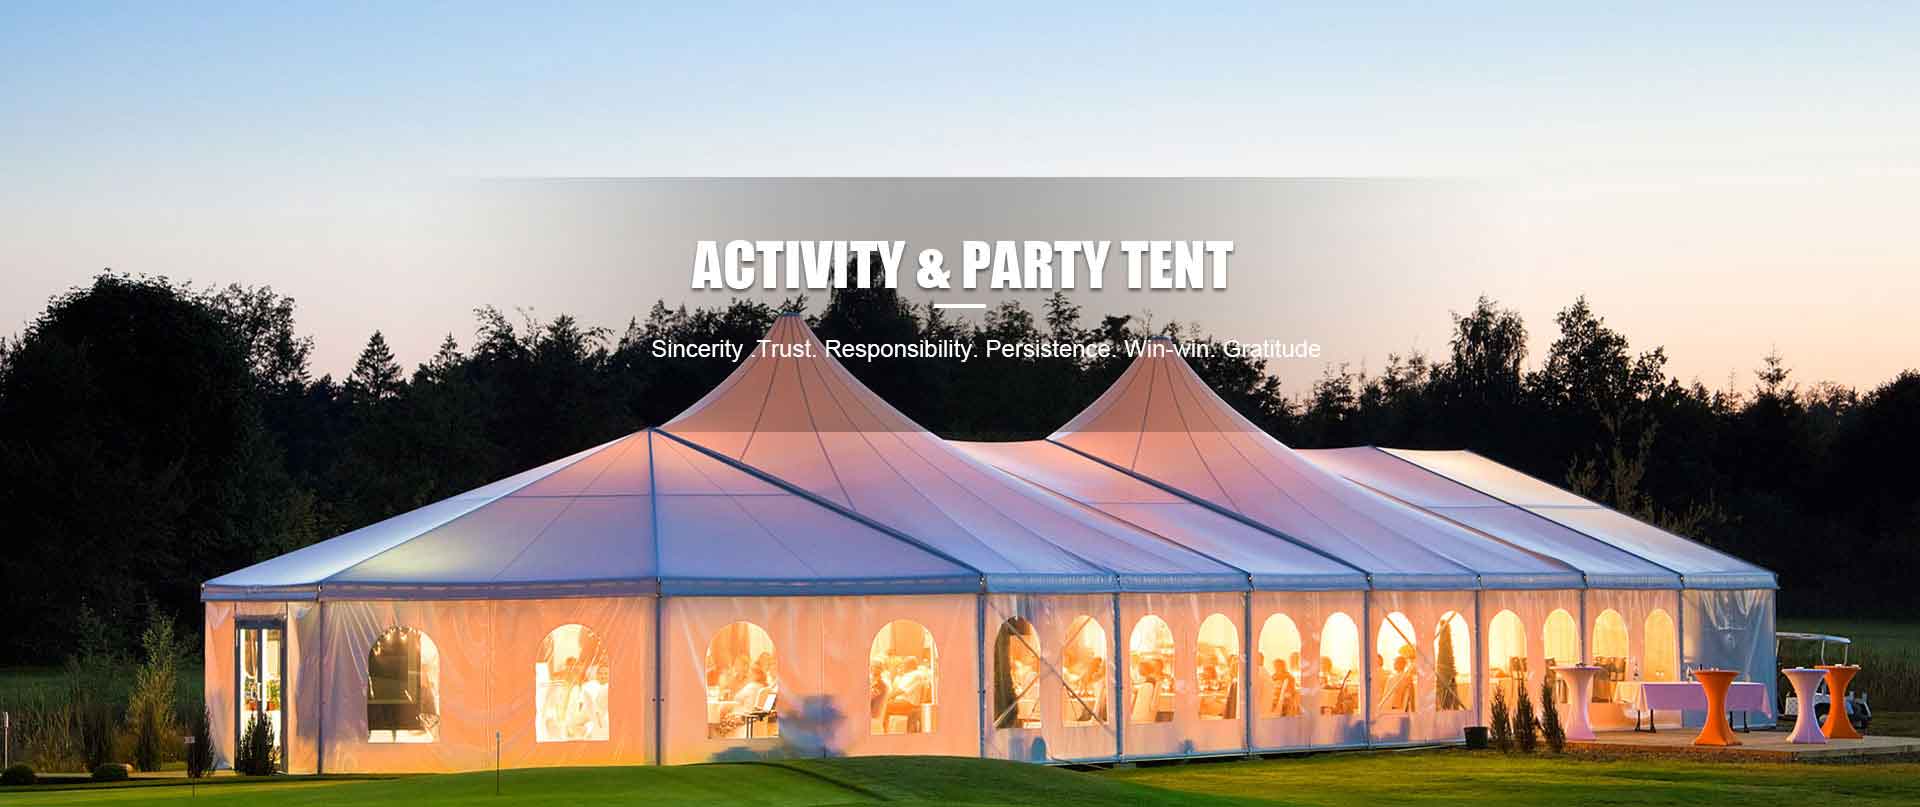 EVENTS & PARTY TENT